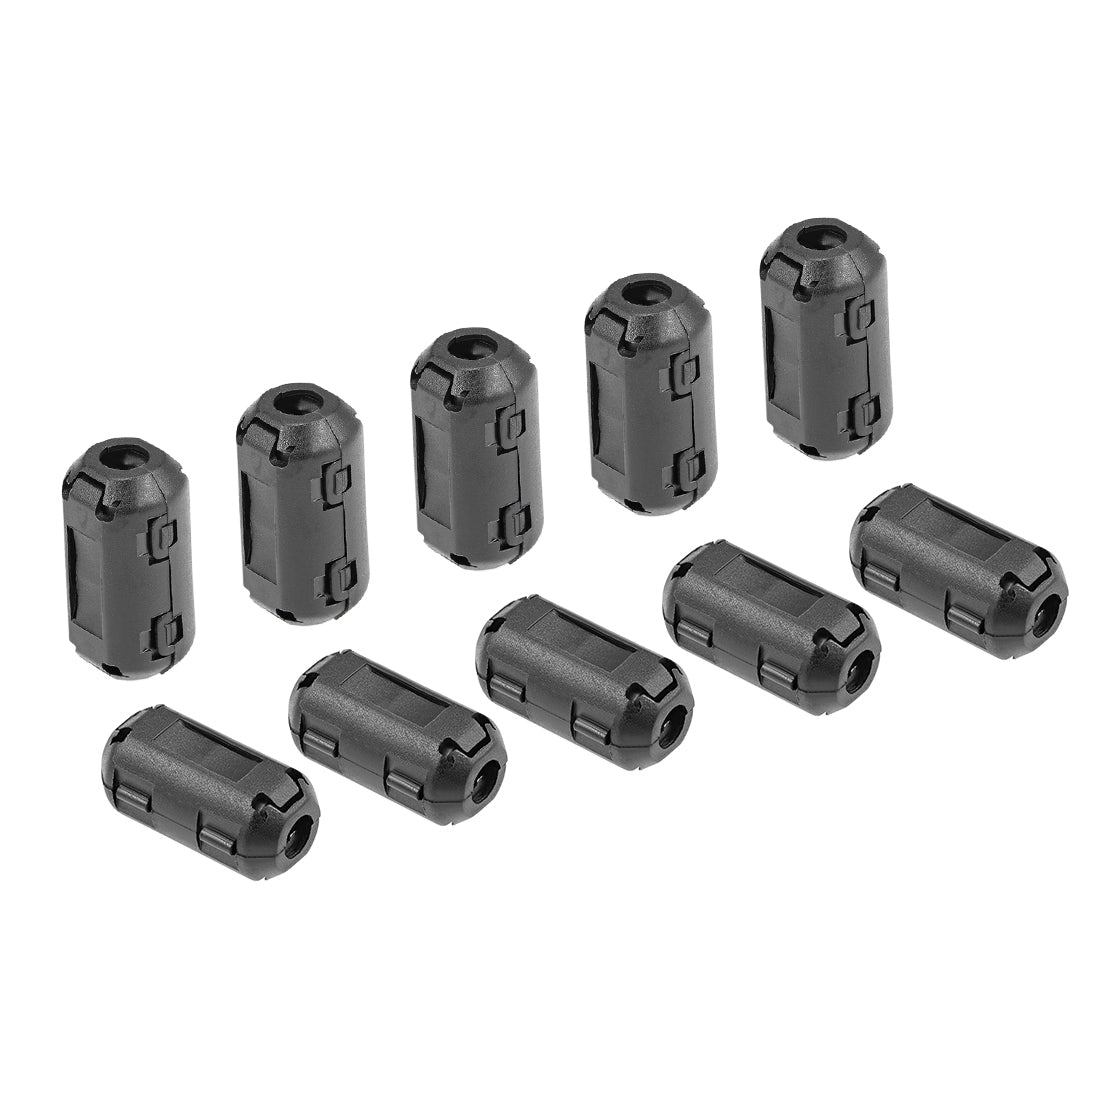 uxcell Uxcell 3.5mm Ferrite Cores Ring Clip-On RFI EMI Noise Suppression Filter Cable Clip, Black 10pcs